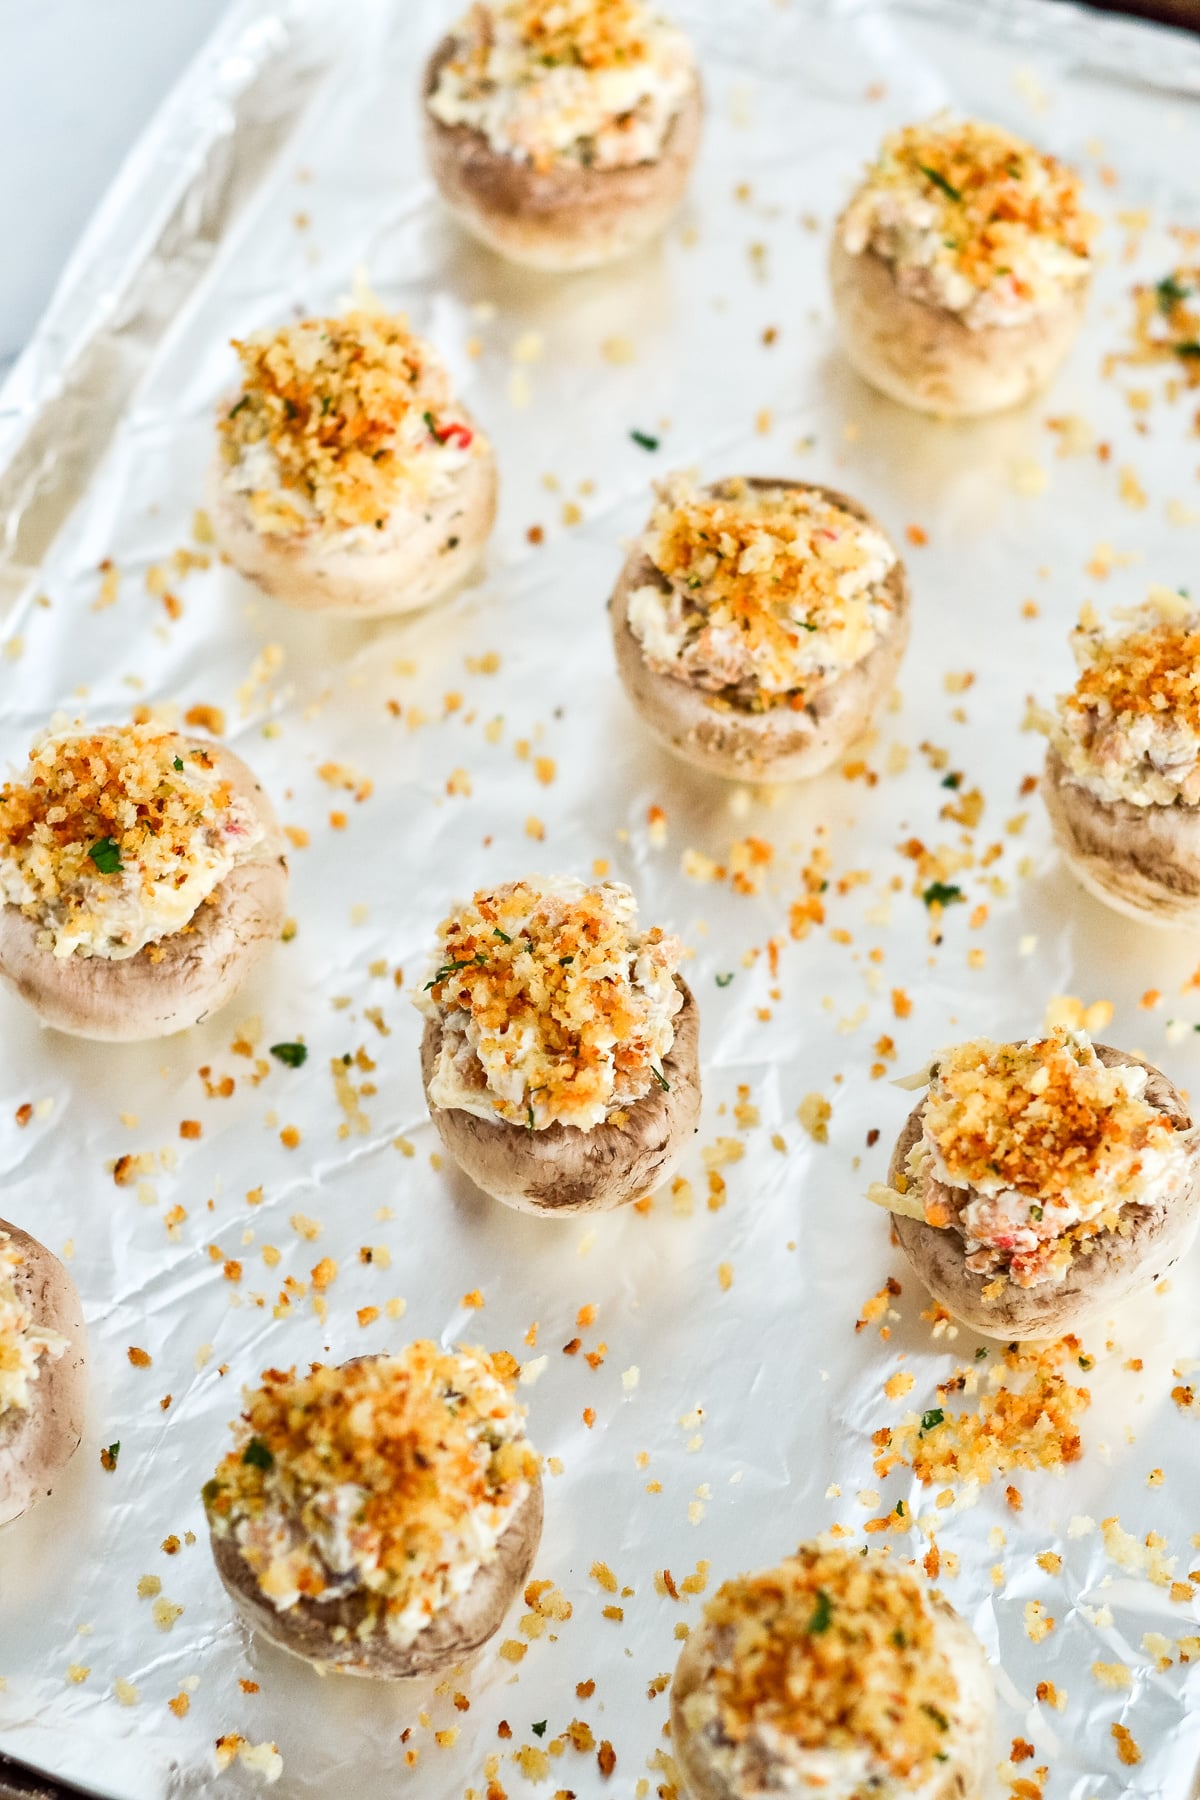 press each stuffed mushroom into the topping and return to cookie sheet